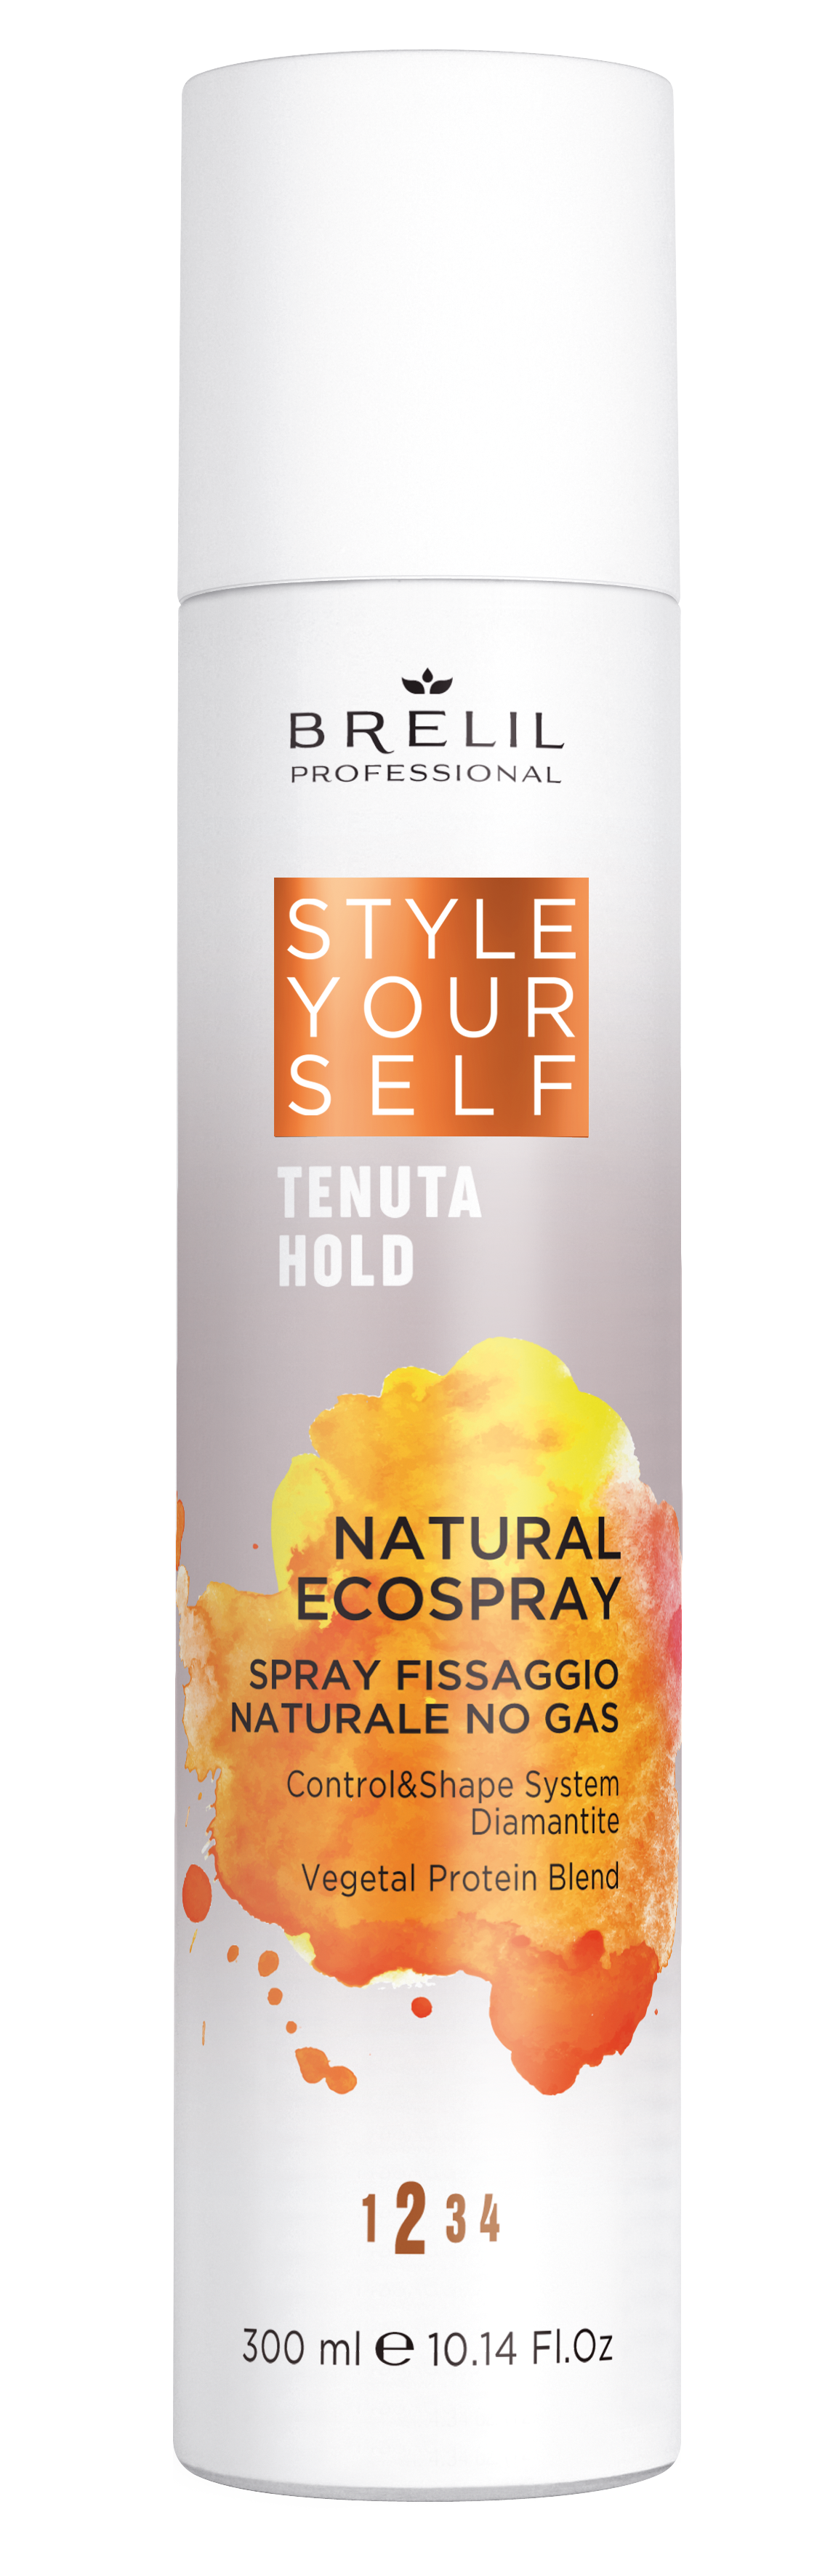 STYLE YOURSELF HOLD NATURAL EC﻿OSPRAY